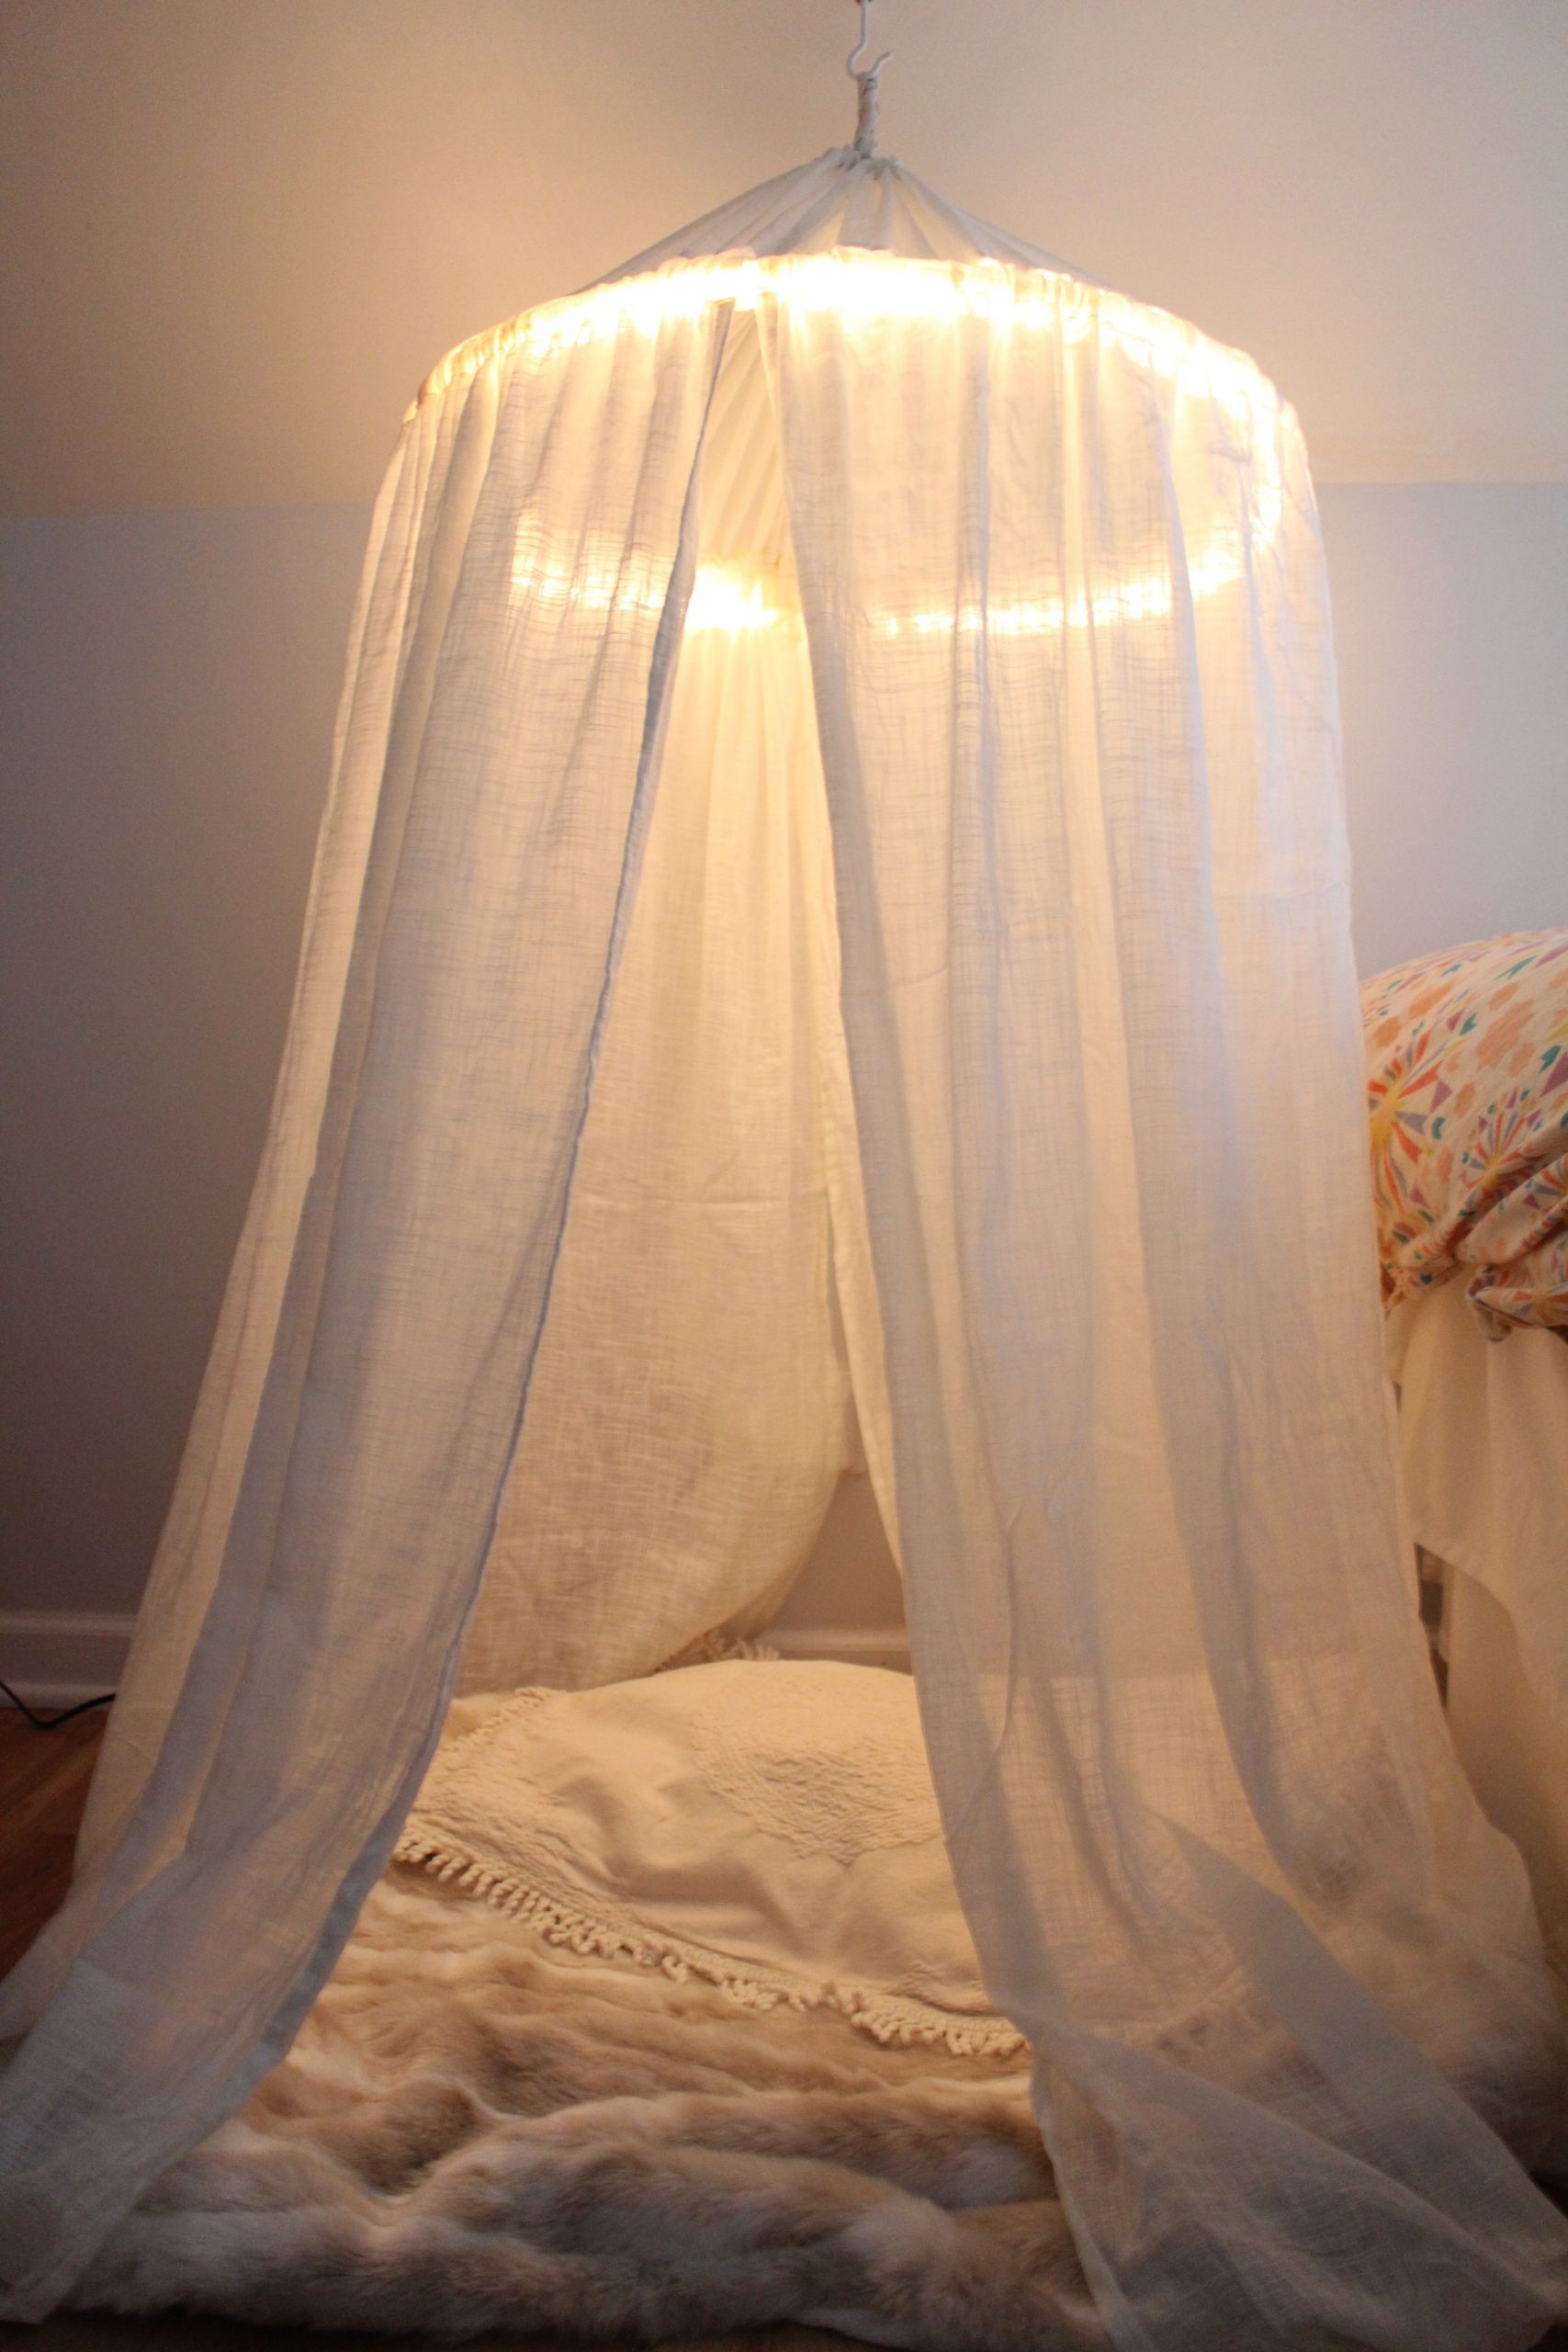 DIY Toddler Bed Tent
 12 DIY Canopy Beds That Will Make Your Bedroom Feel Like a